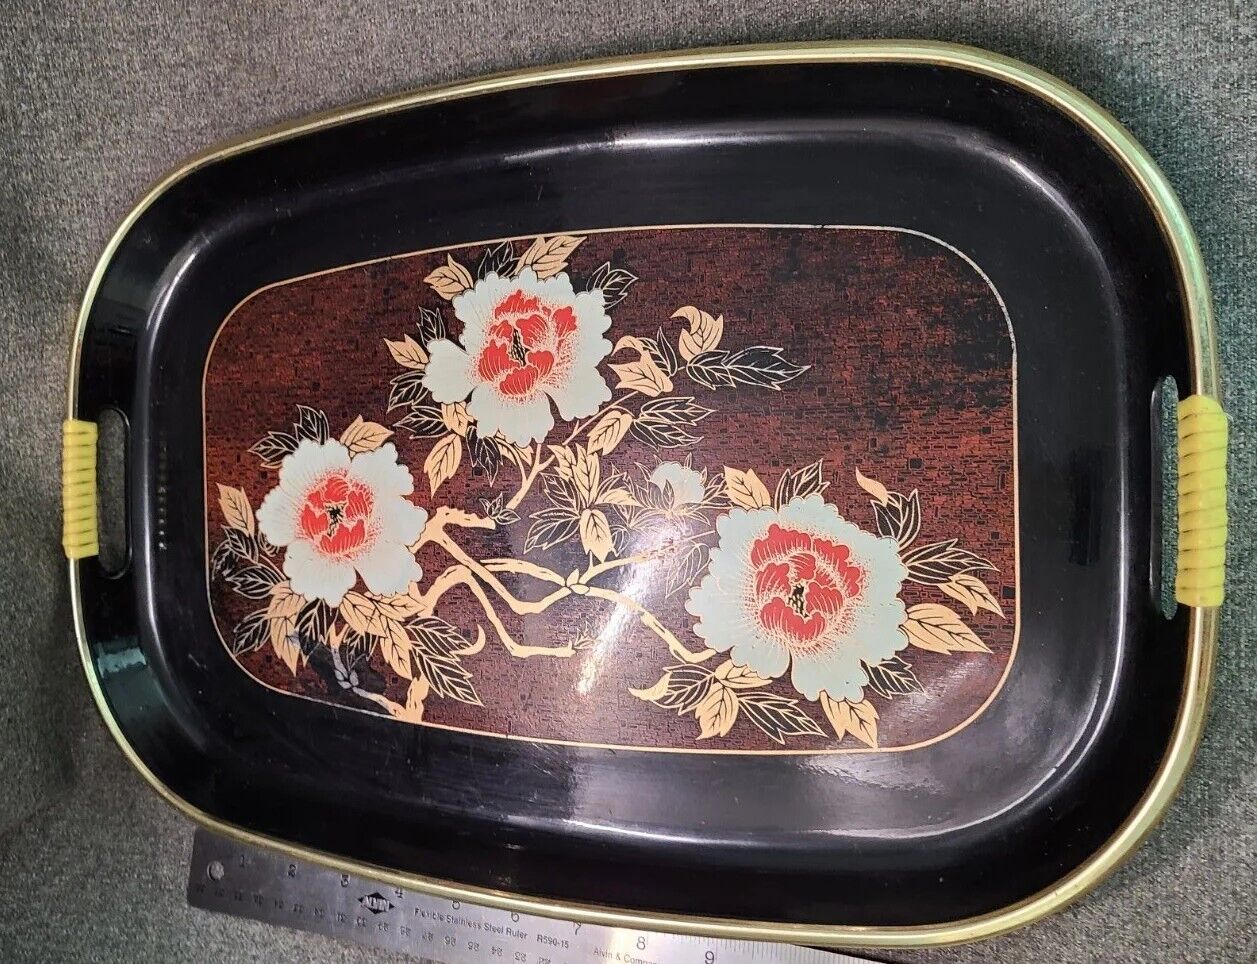 VINTAGE JAPANESE BLACK LACQUER TRAY 11 X 17 X 1 PEONY FLOWERS GOLD RIMMED